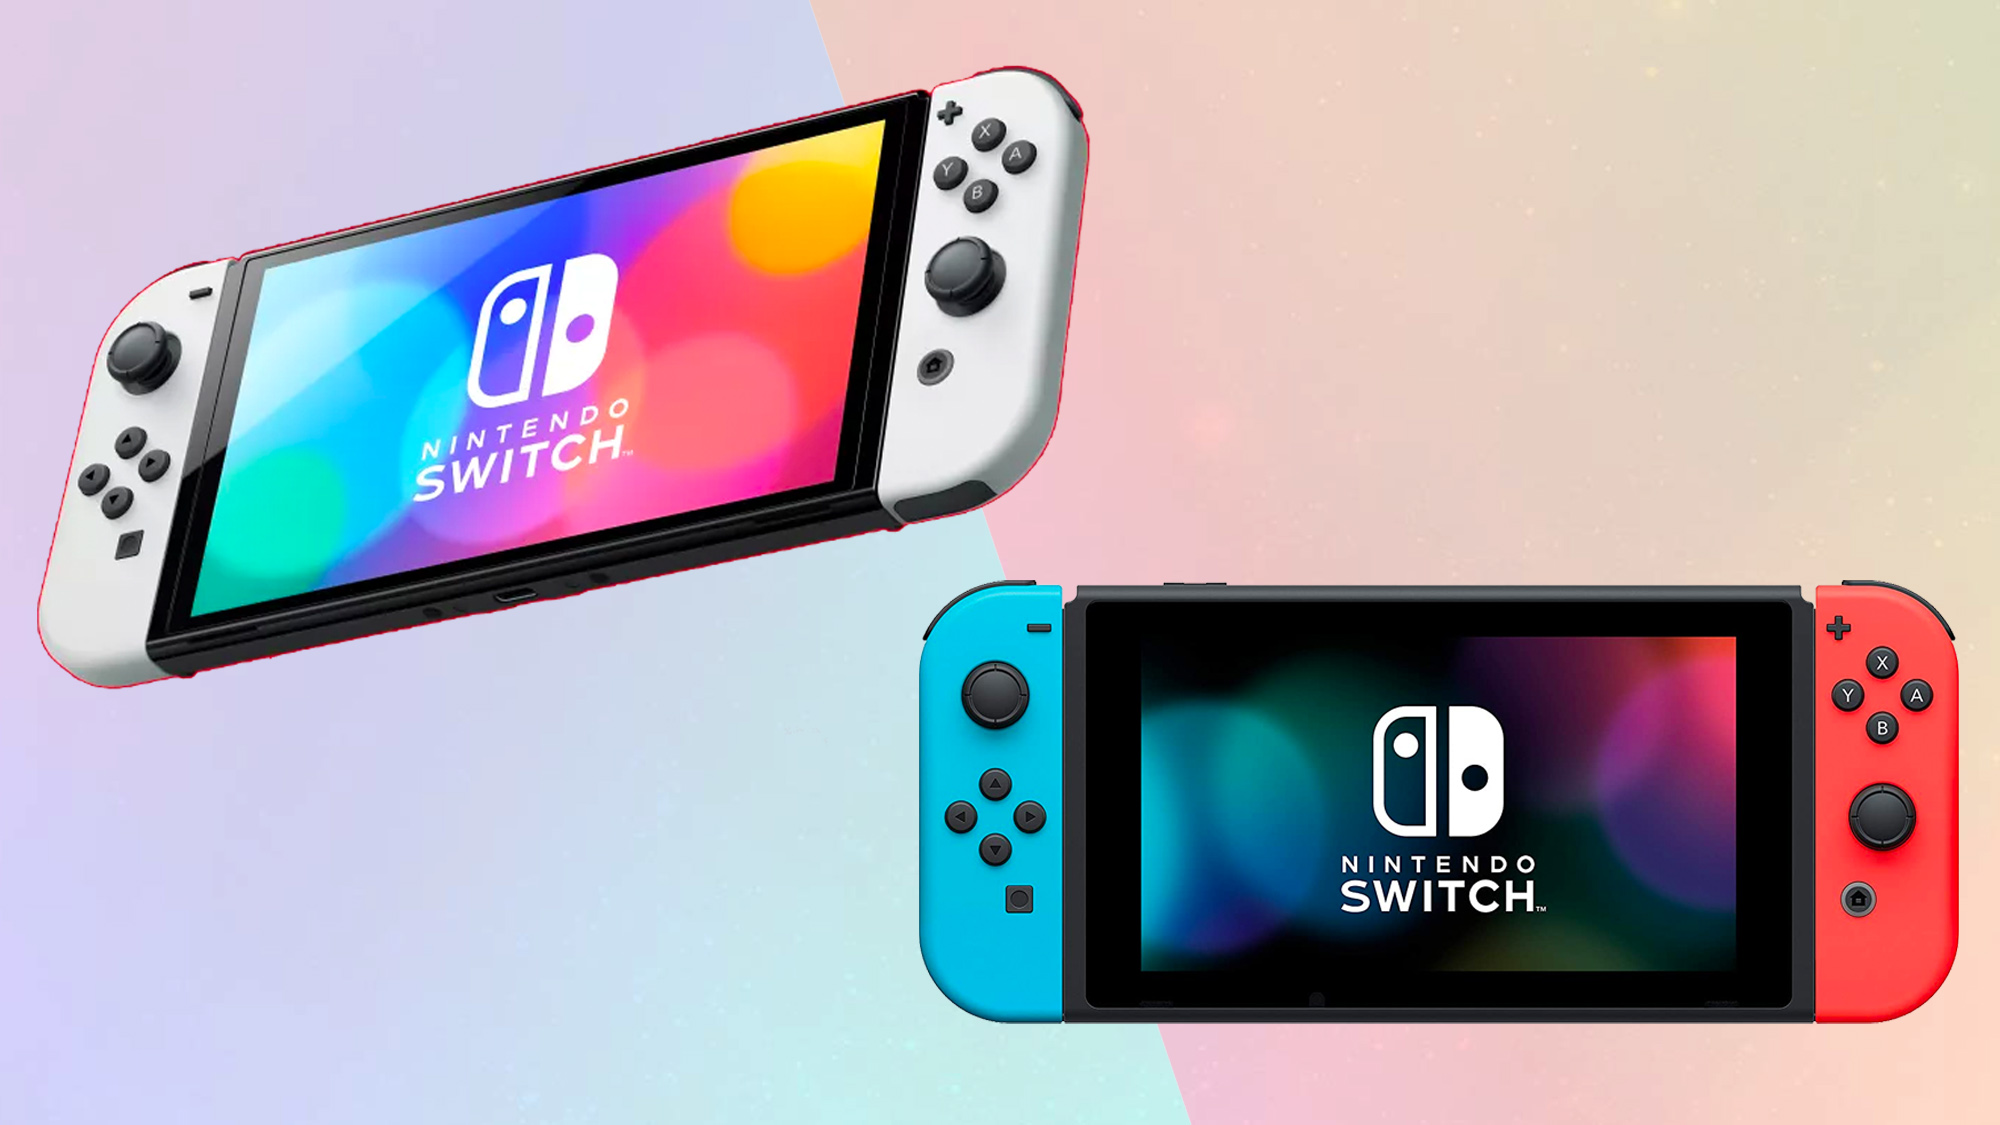 Nintendo Switch 2 potential release date revealed by job listing Tom